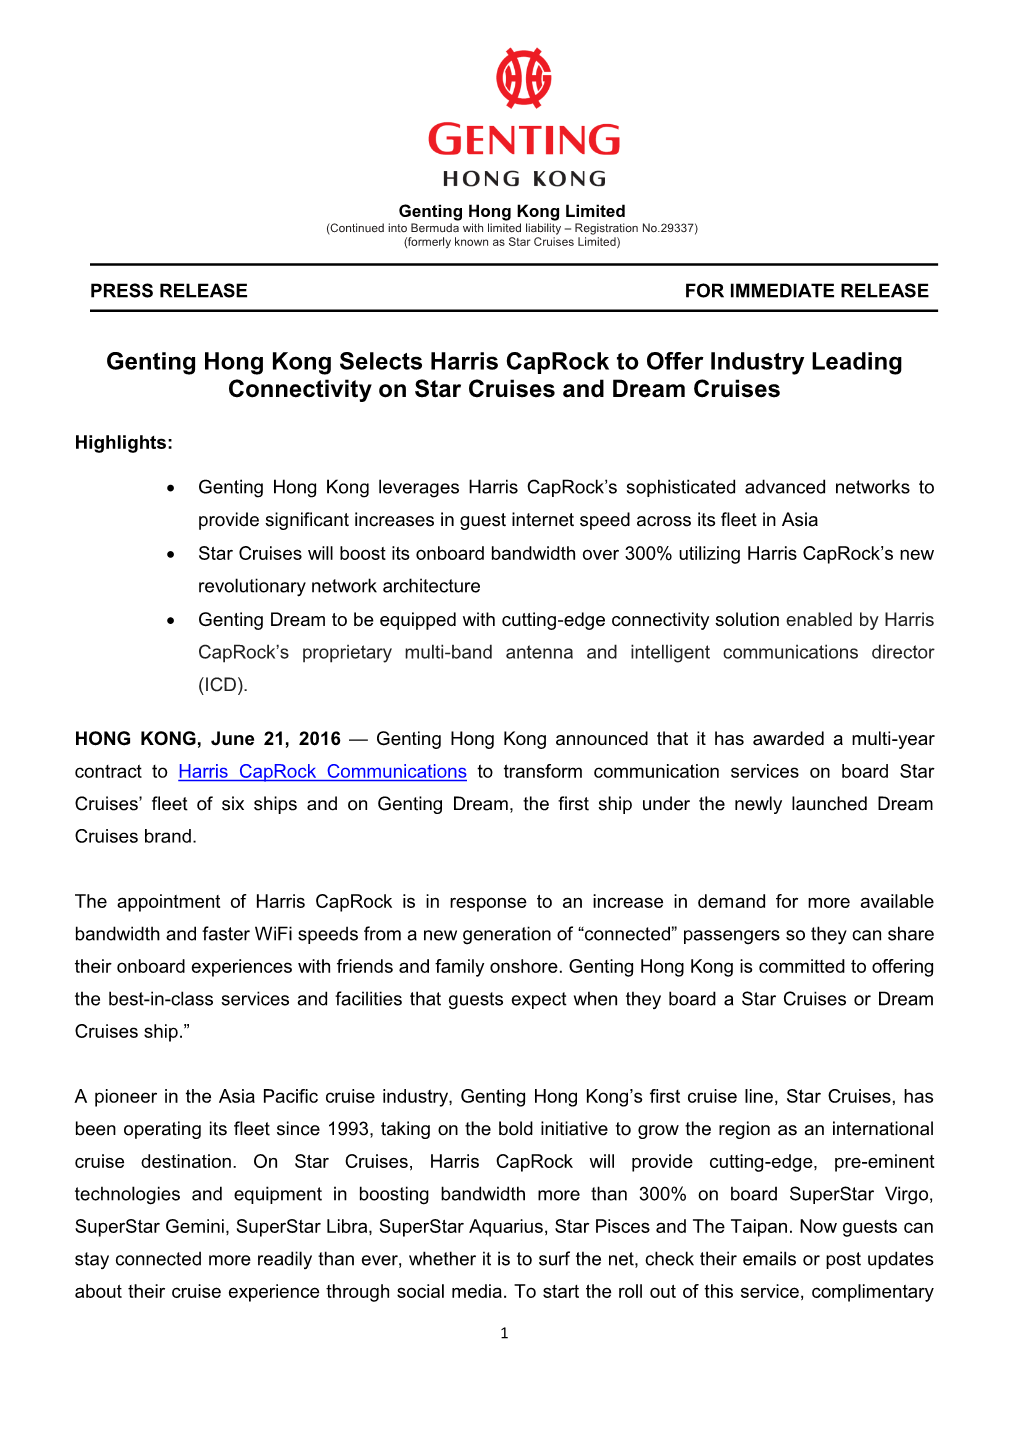 Genting Hong Kong Selects Harris Caprock to Offer Industry Leading Connectivity on Star Cruises and Dream Cruises